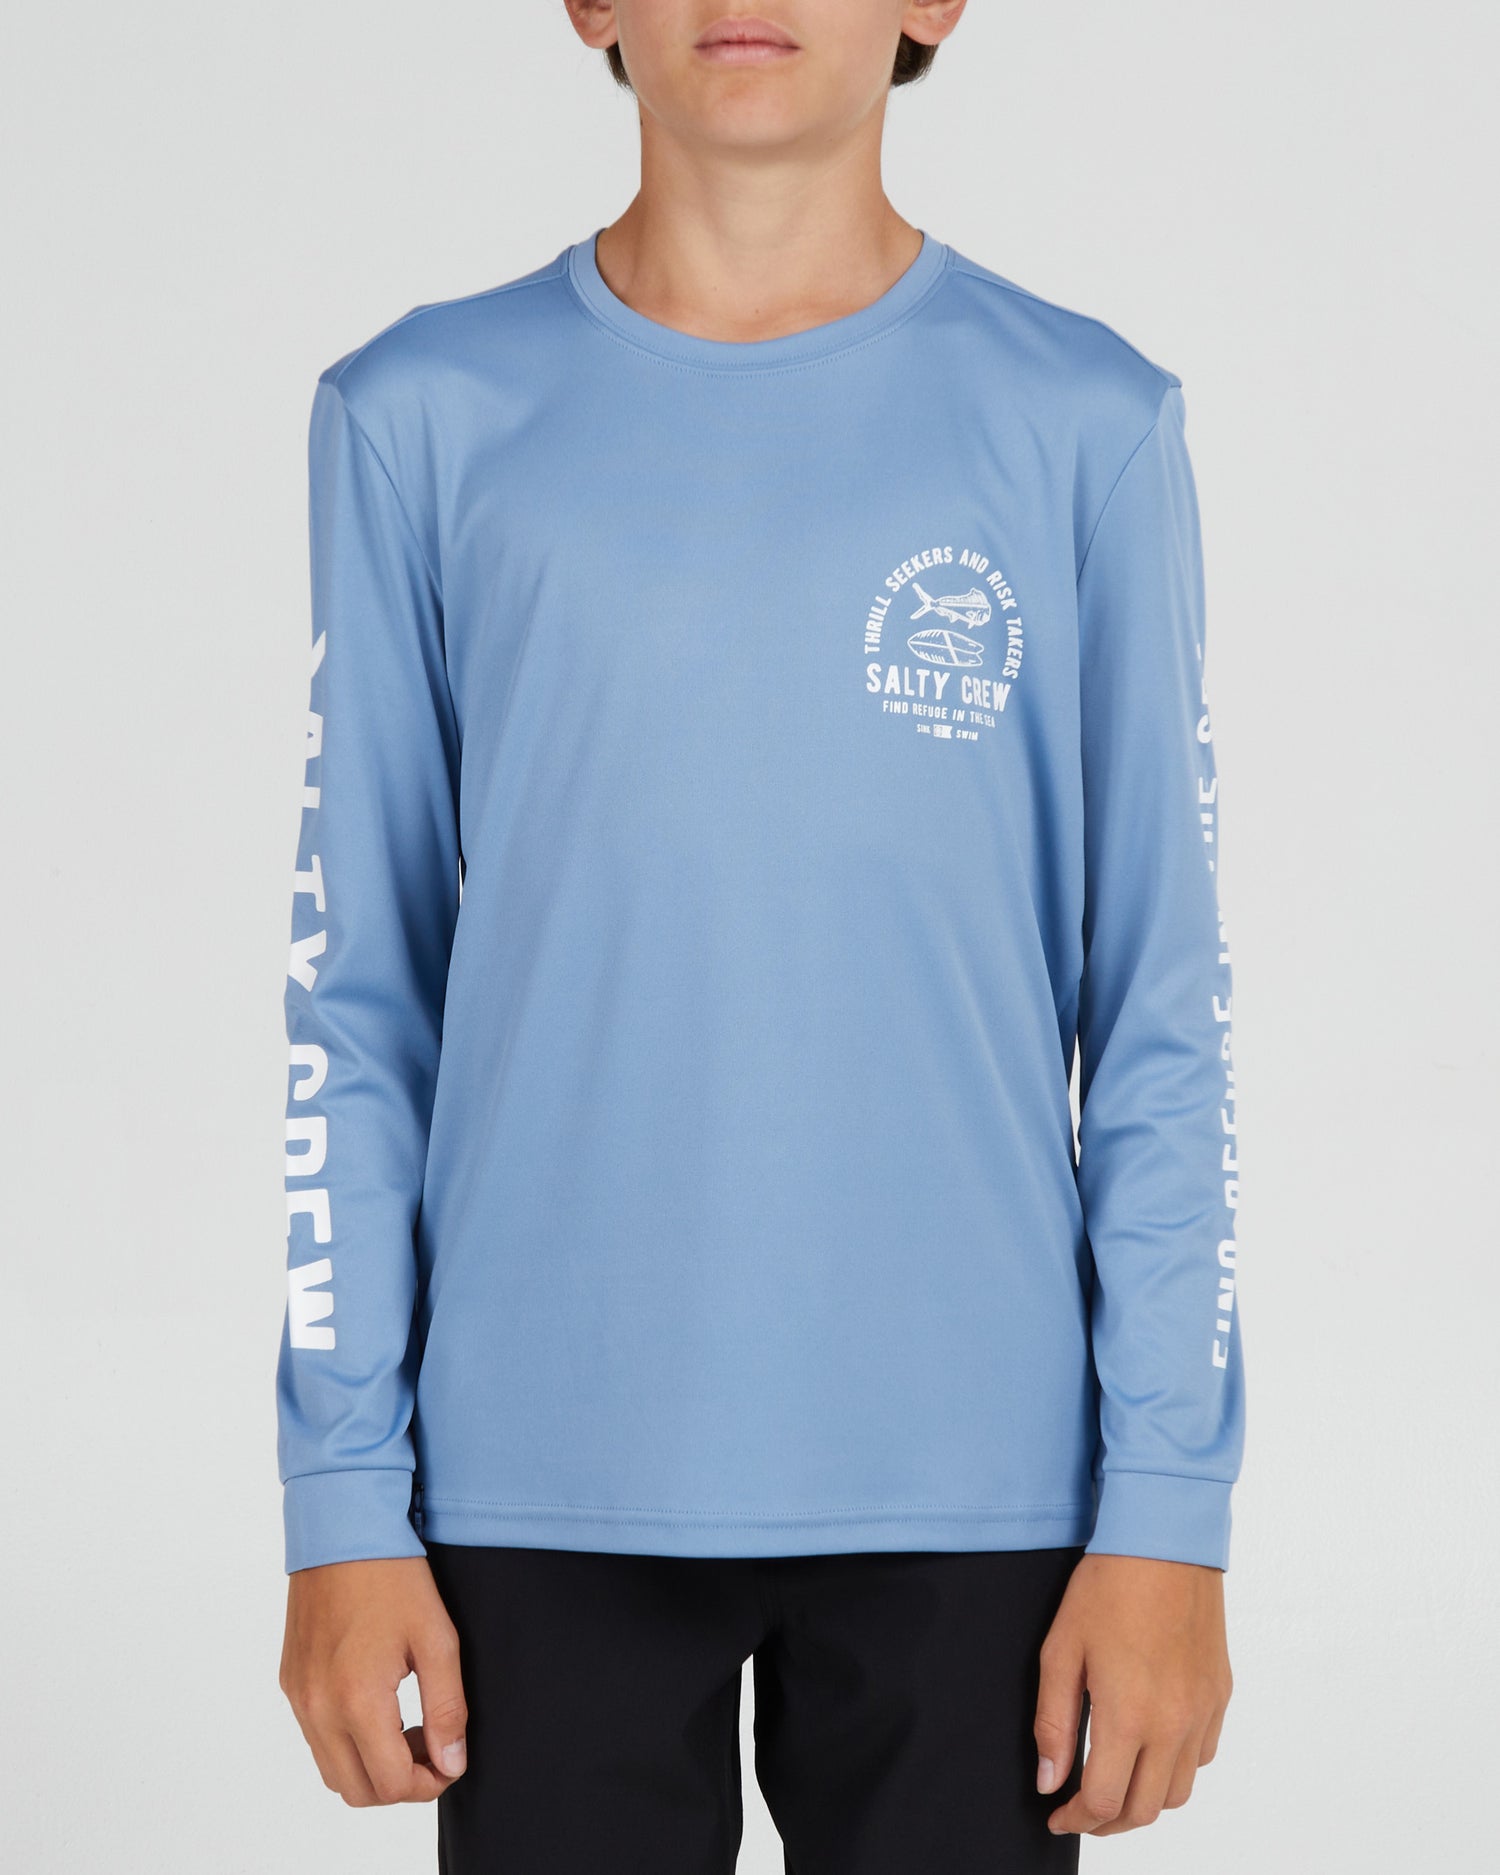 front view of Lateral Line Boys Marine Blue L/S Sunshirt